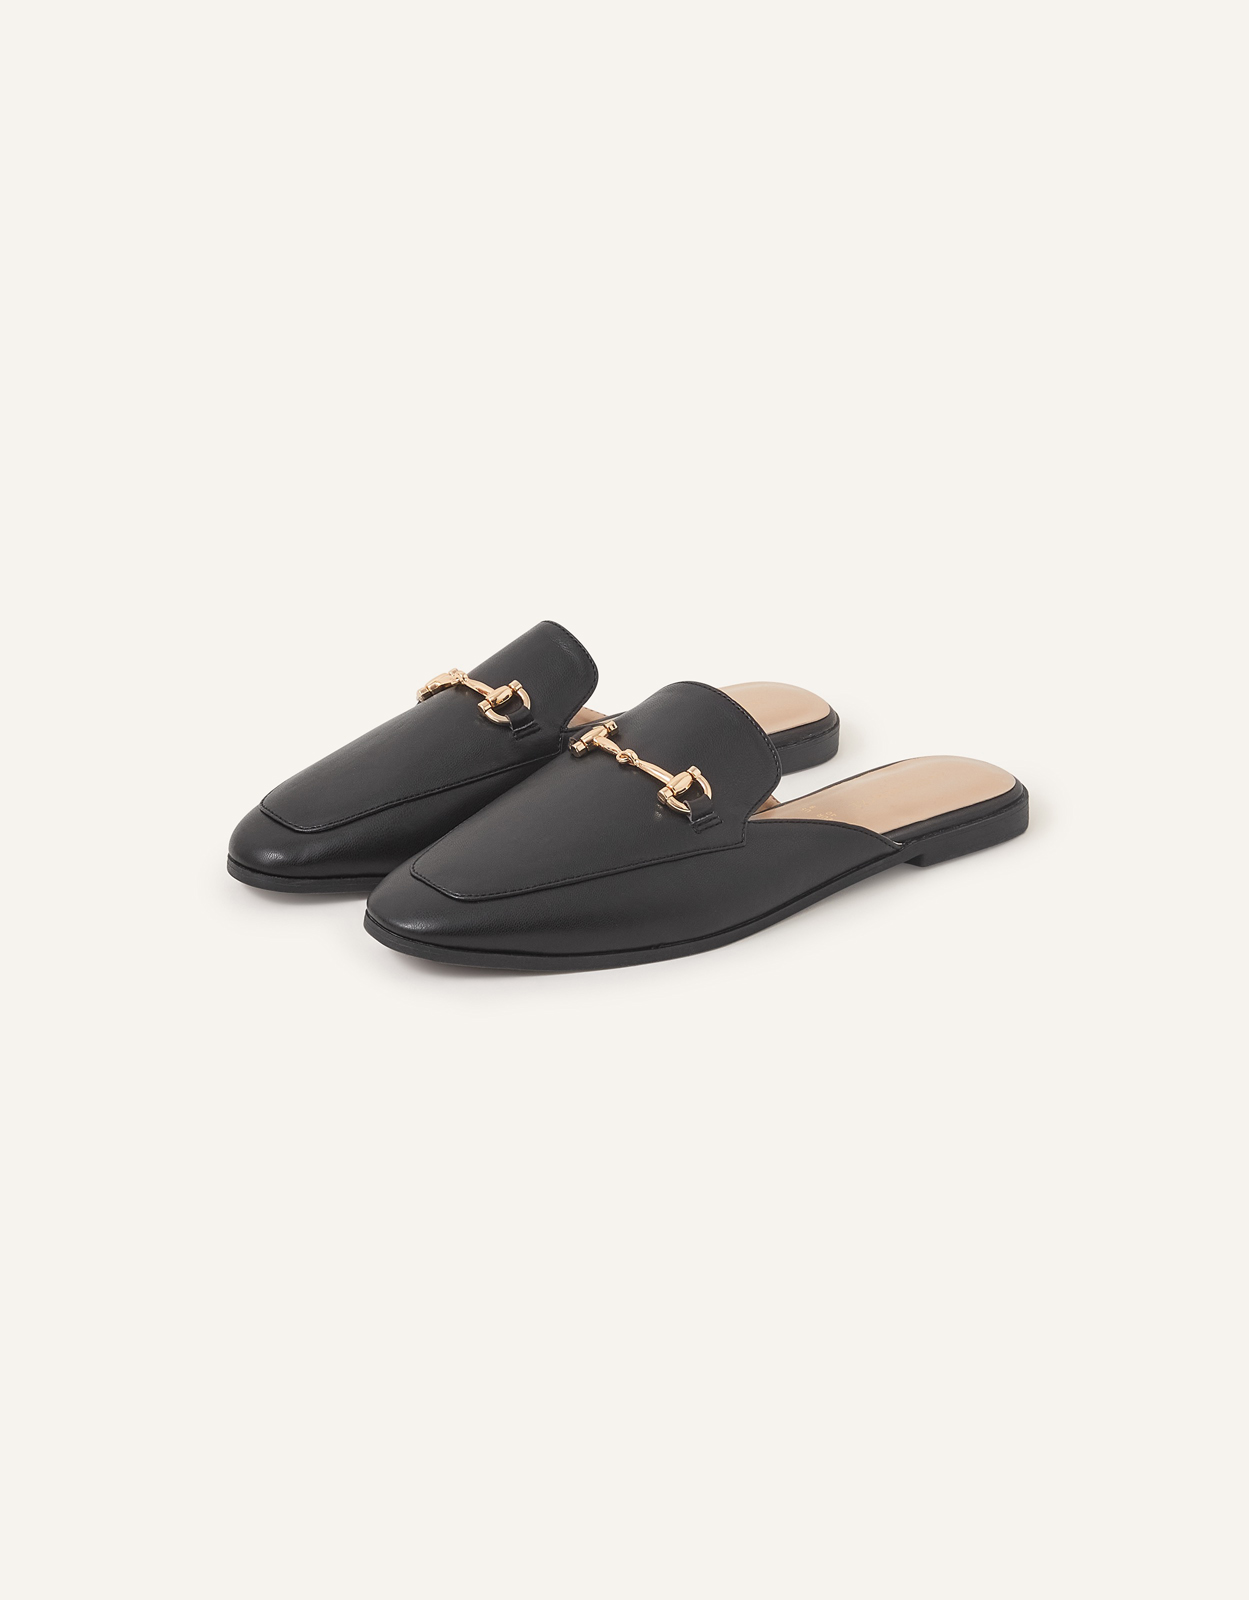 Accessorize Backless Loafers Black, Size: 36